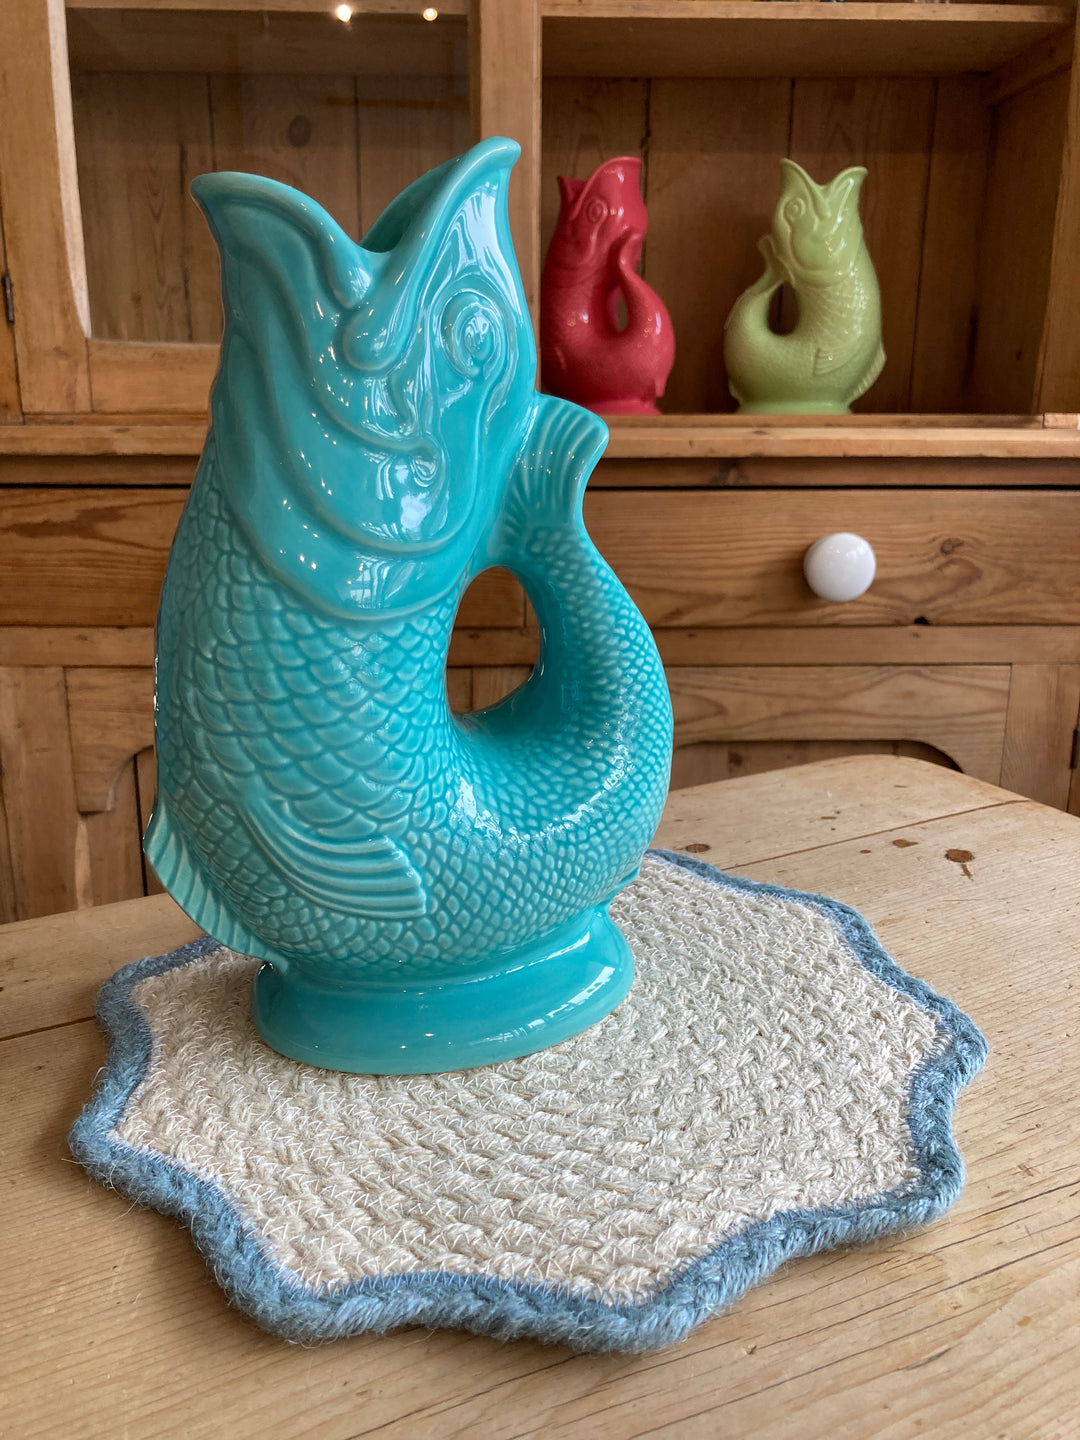 Gluggle jug in Aqua by Gurgly at Source for the Goose 